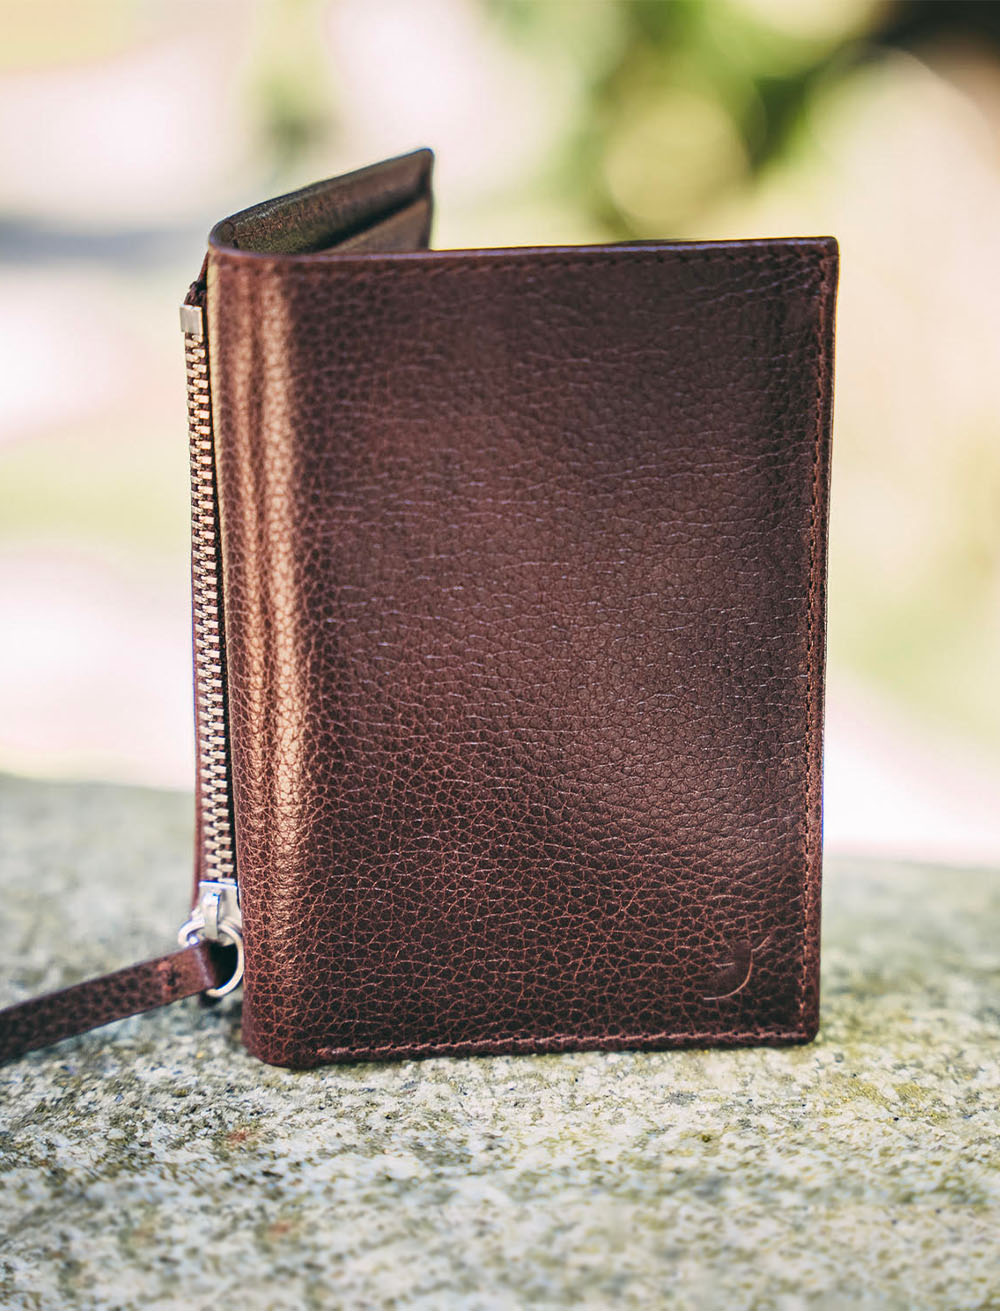 Compact wallet - Chocolate grained